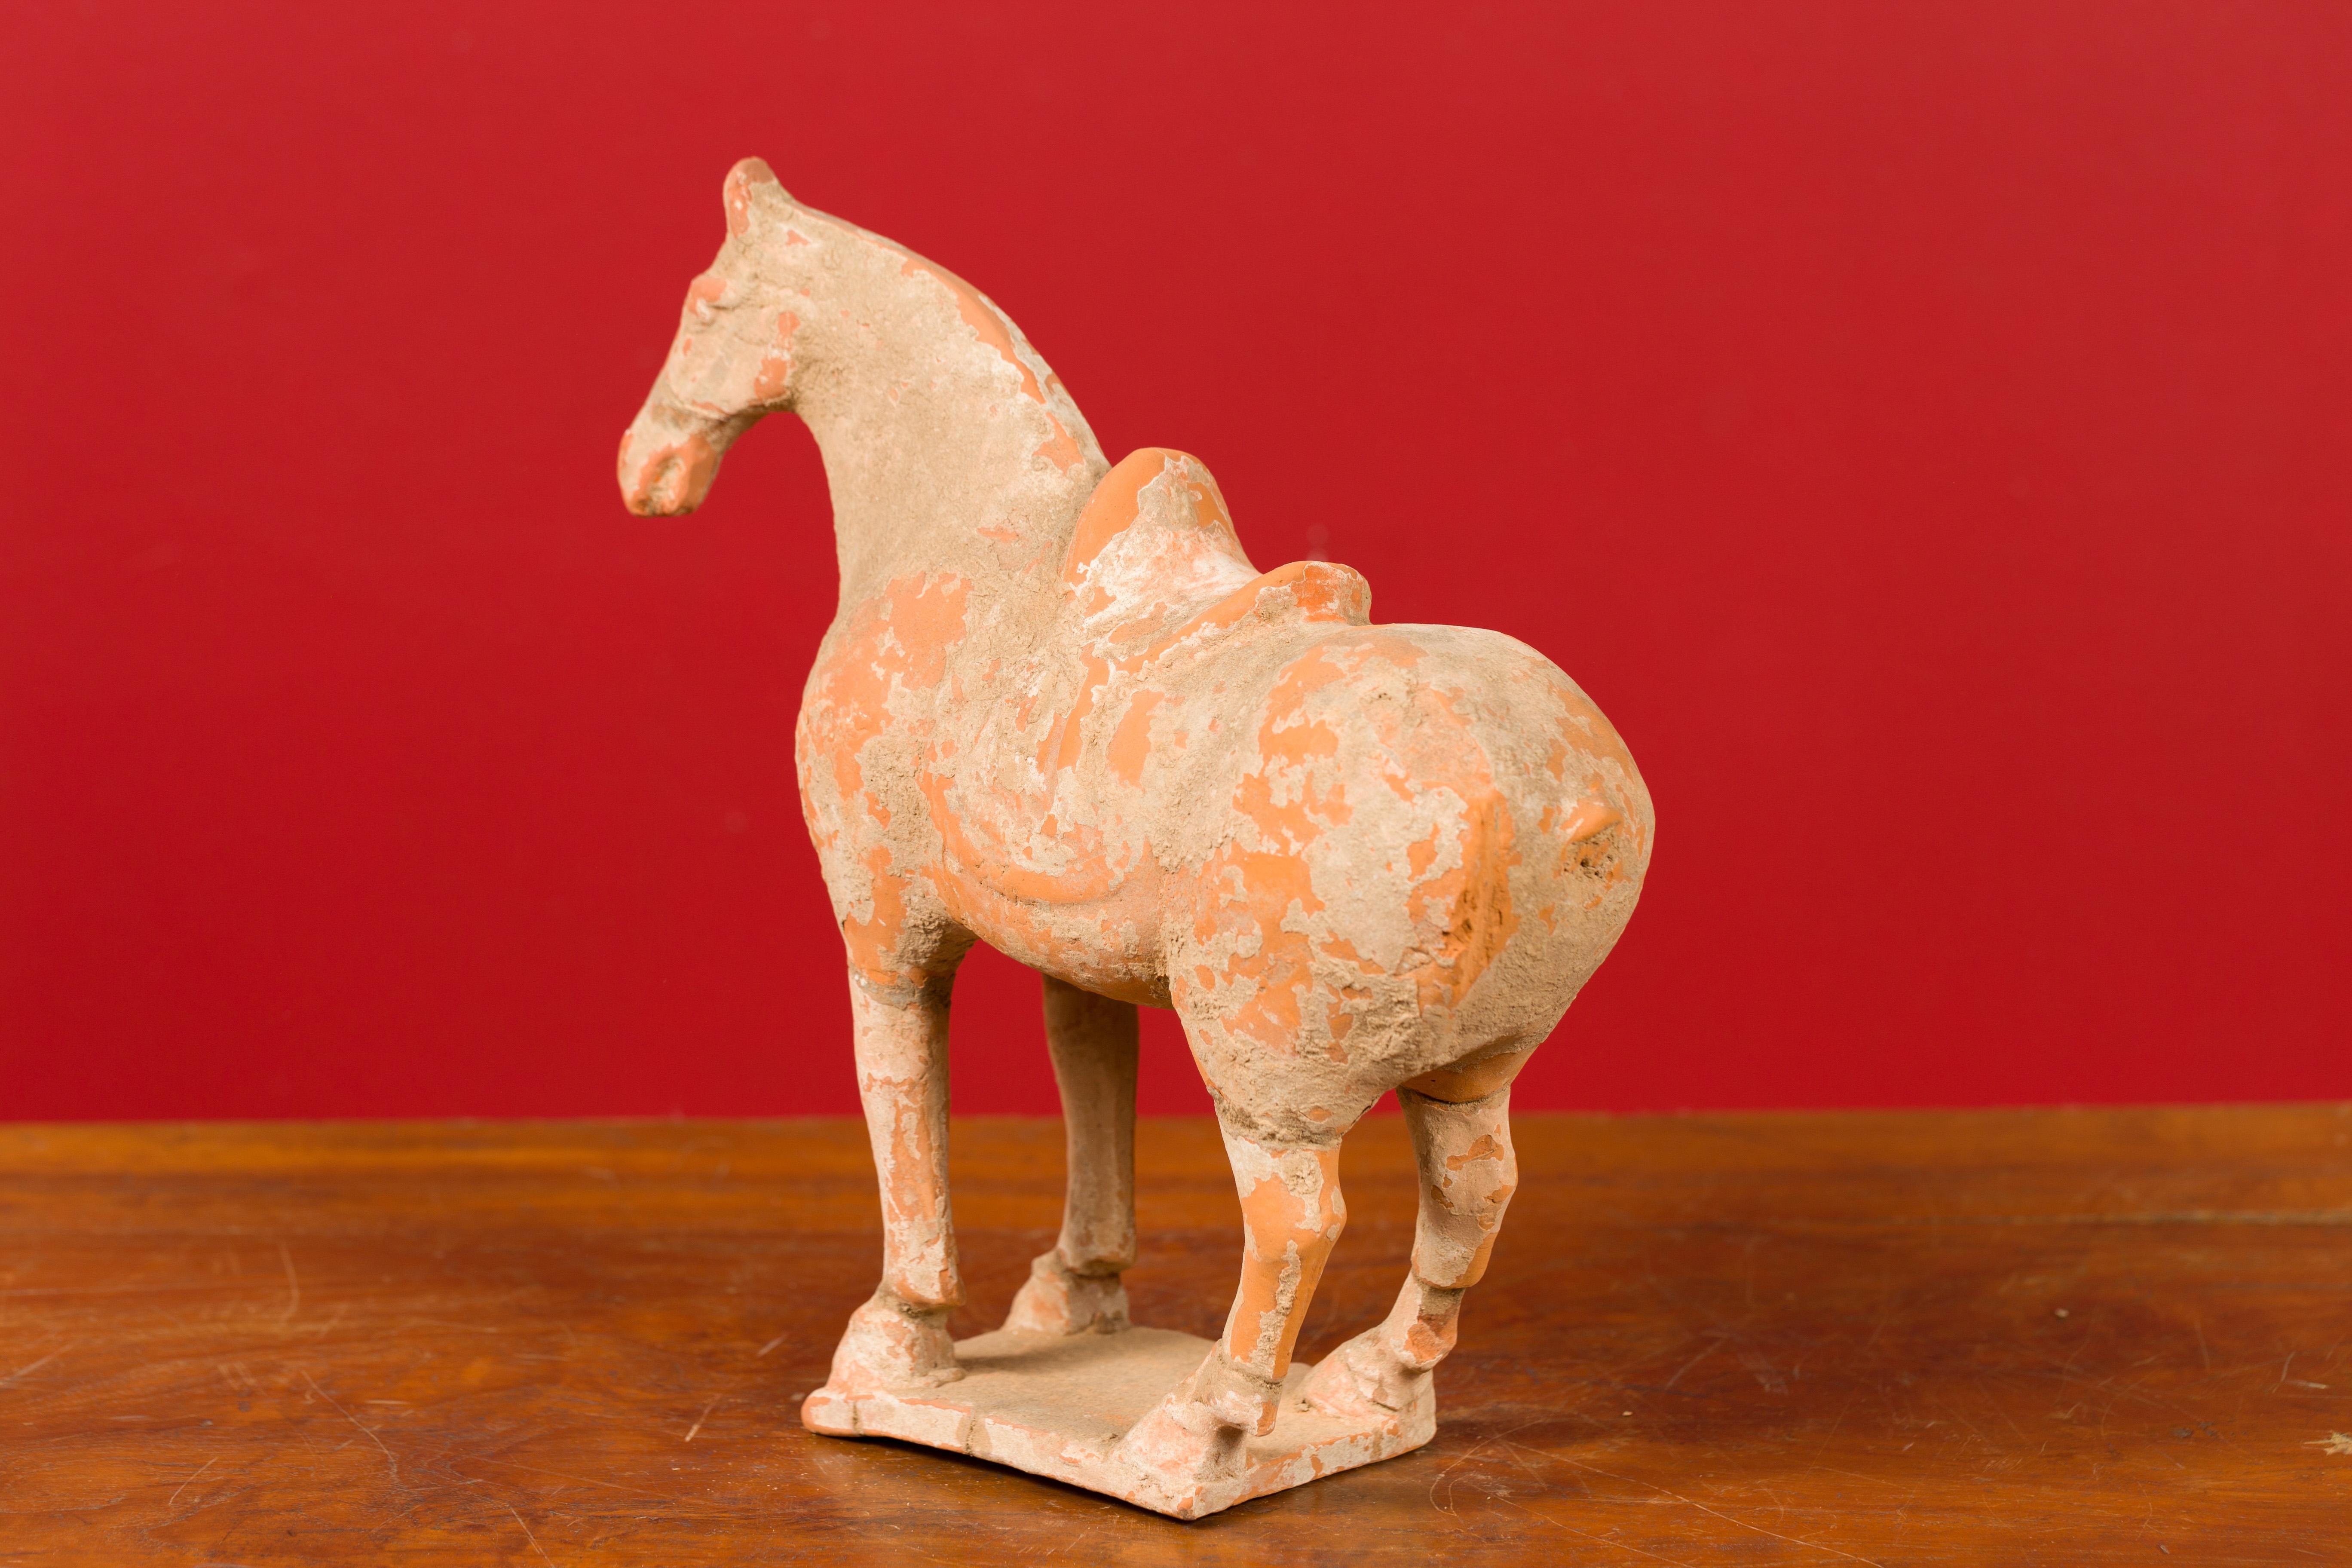 Chinese Han Dynasty Period Mingqi Terracotta Horse with Original Pigmentation 6